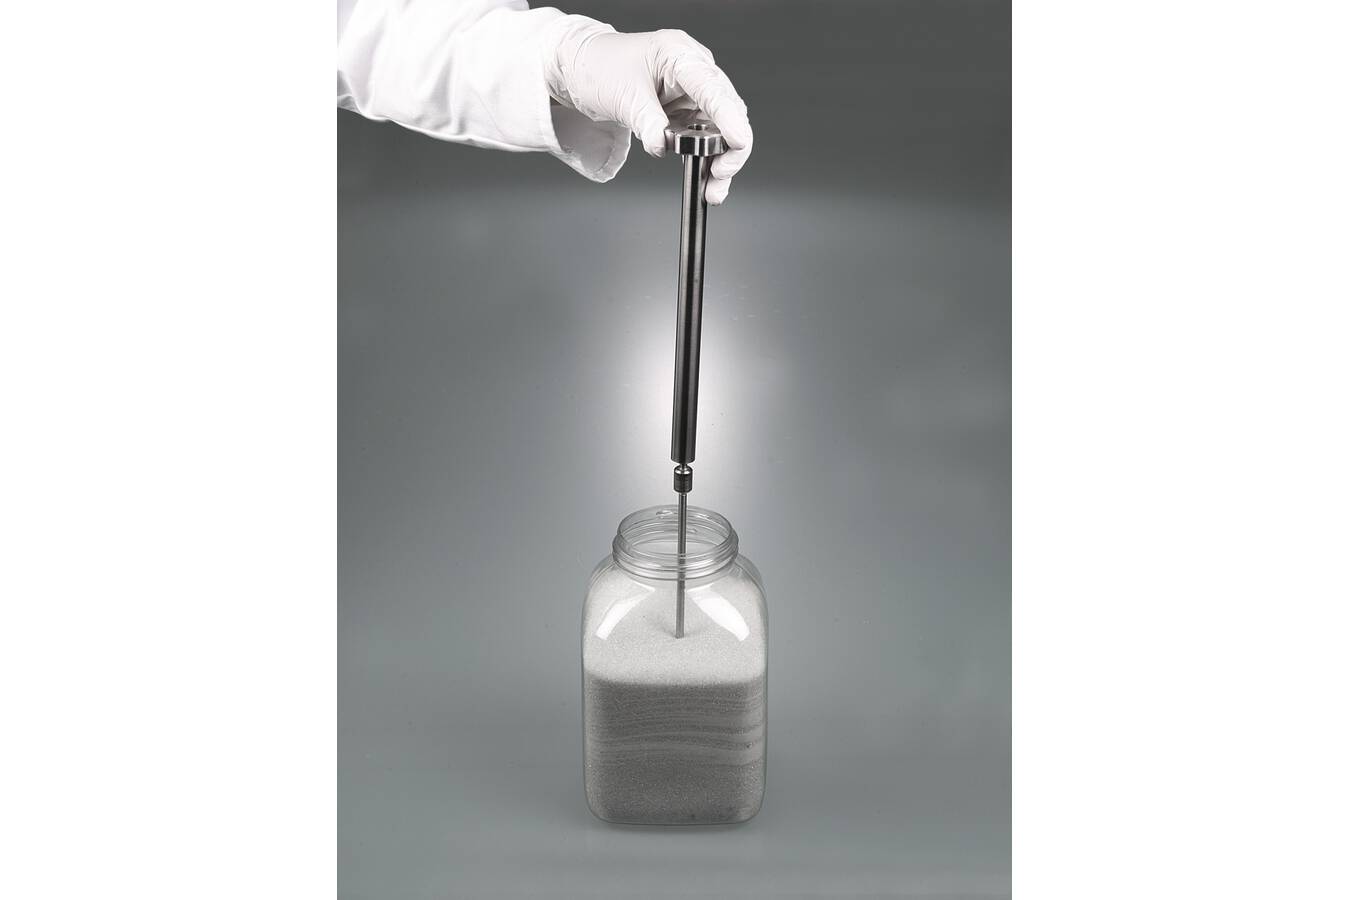 Core Sampler for difficult bulk solids  Bürkle’s new Core Sampler has been specially developed for powders and granulates which easily jam or consolidate during sampling